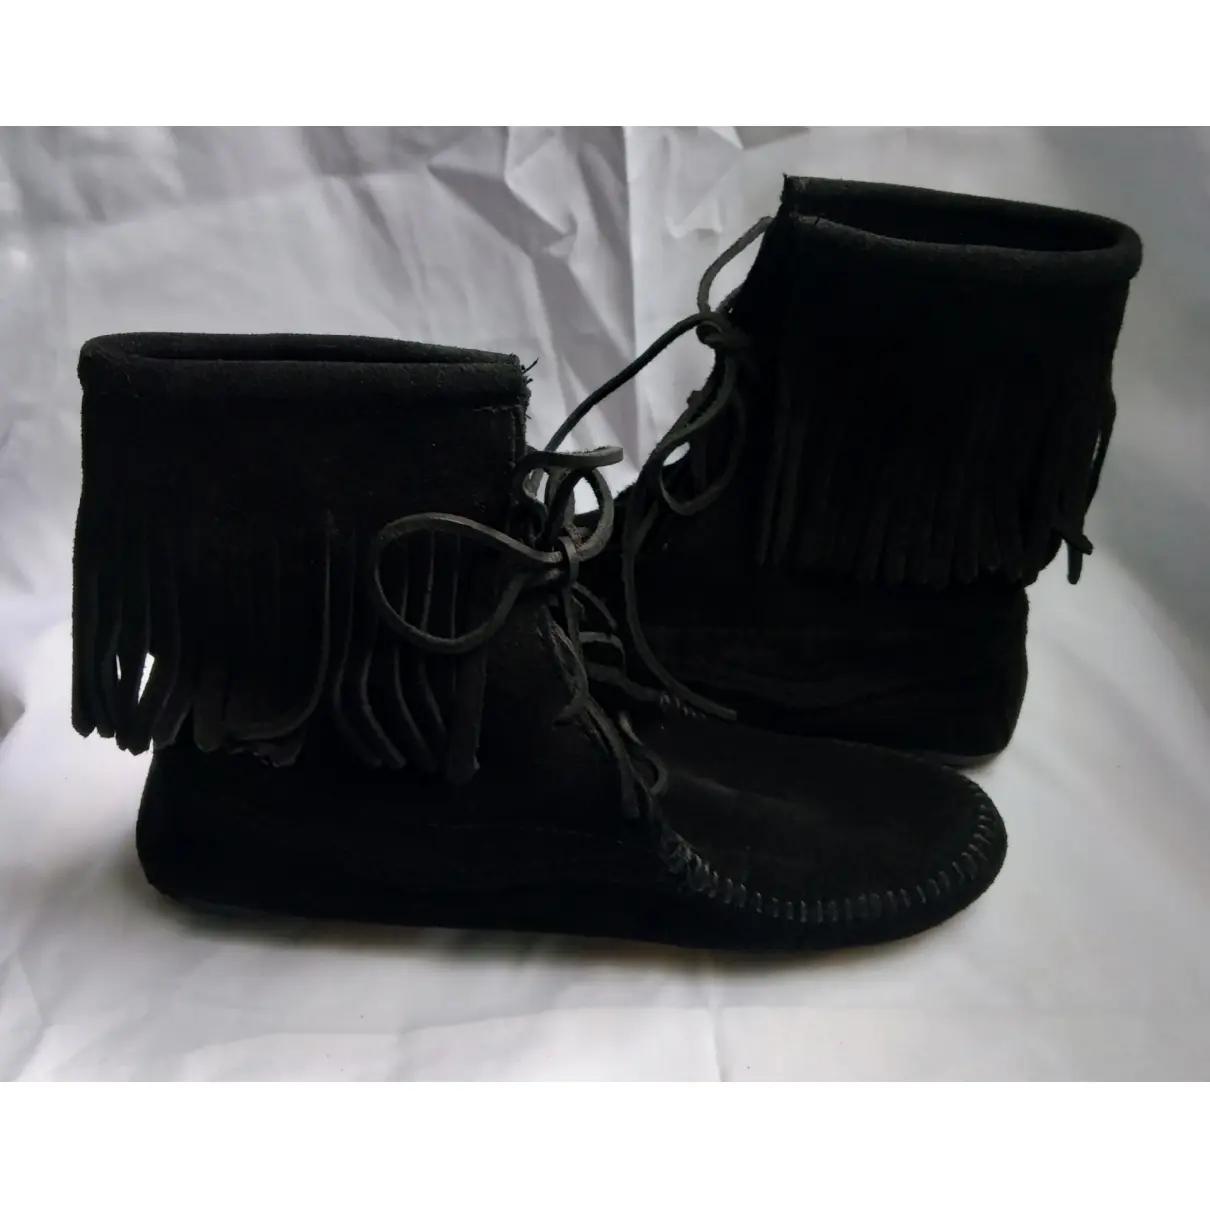 Buy Minnetonka Leather ankle boots online